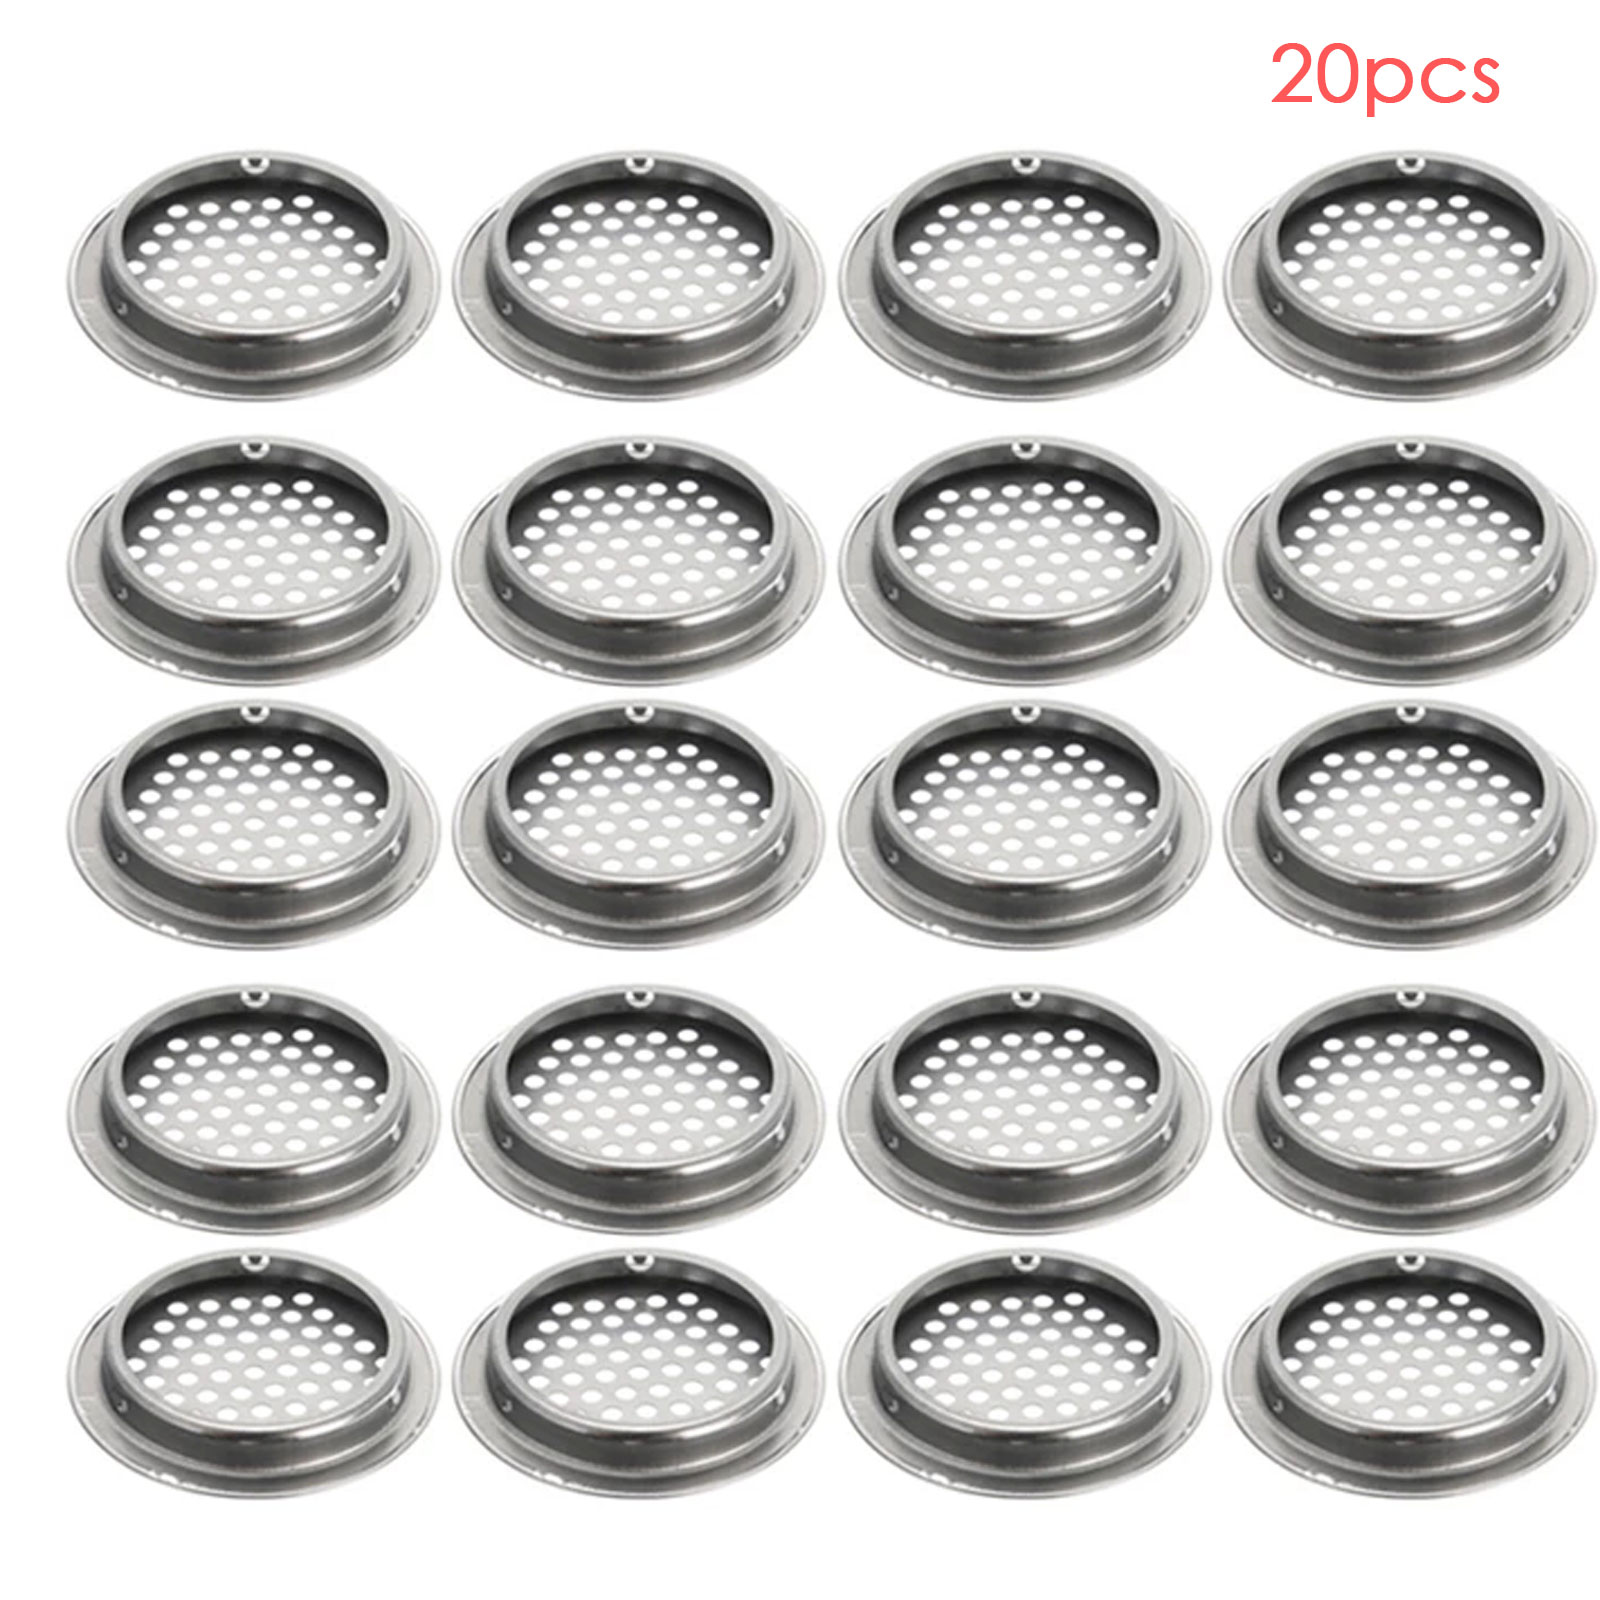 53mm 20pcs Stainless Steel Mesh Hole Air Vents Louver Air Vent Cover